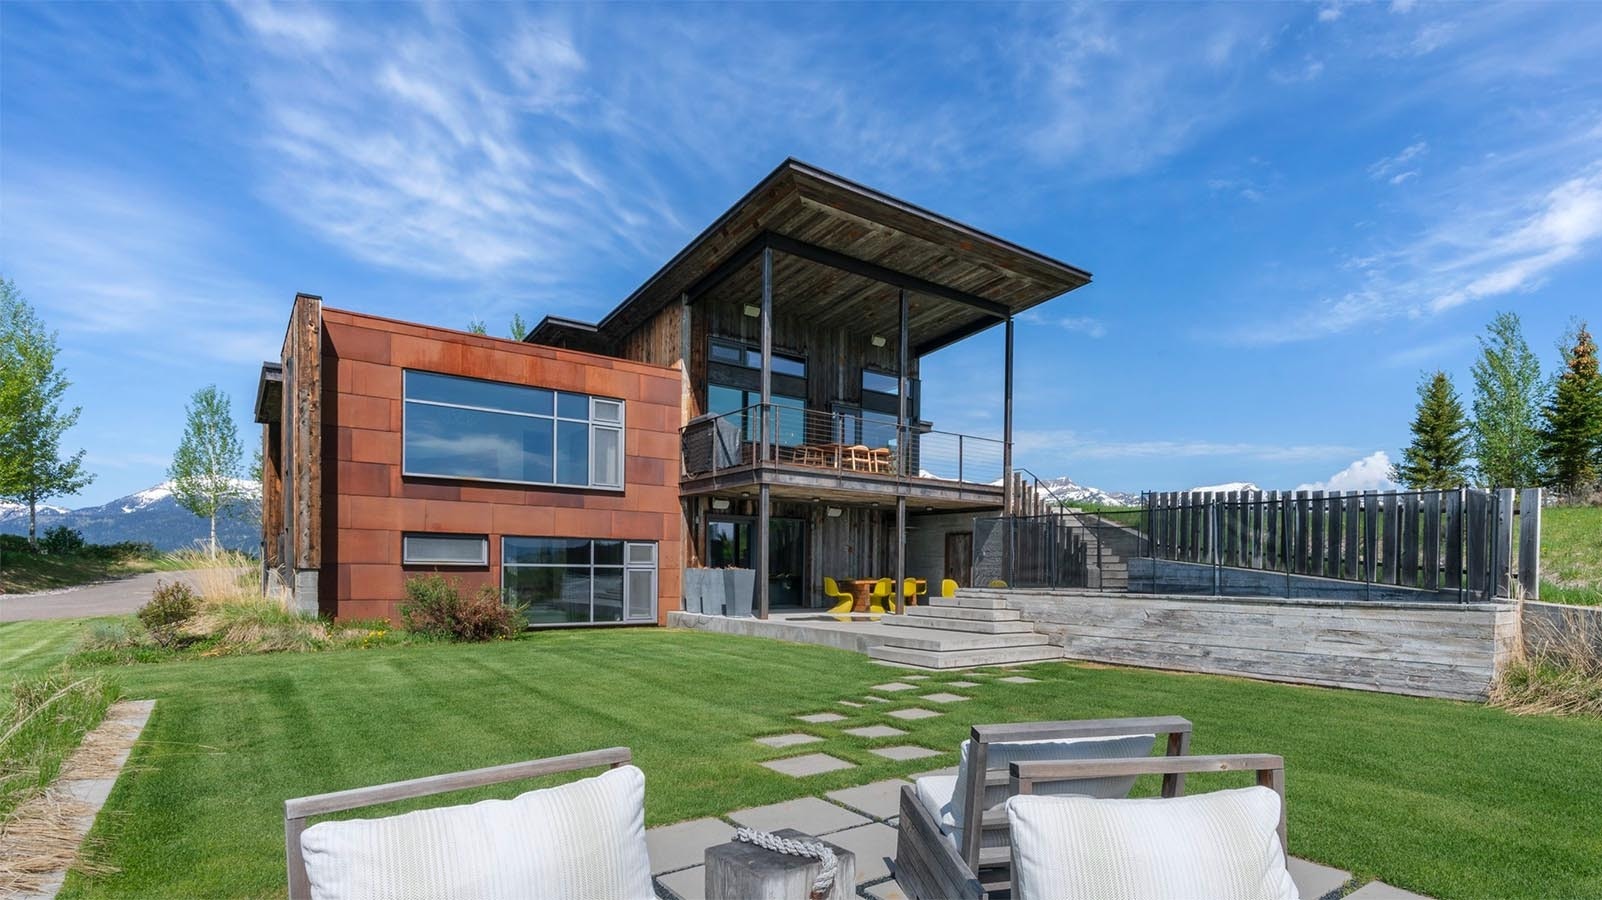 This geothermal home in Jackson is on the market for $13 million.